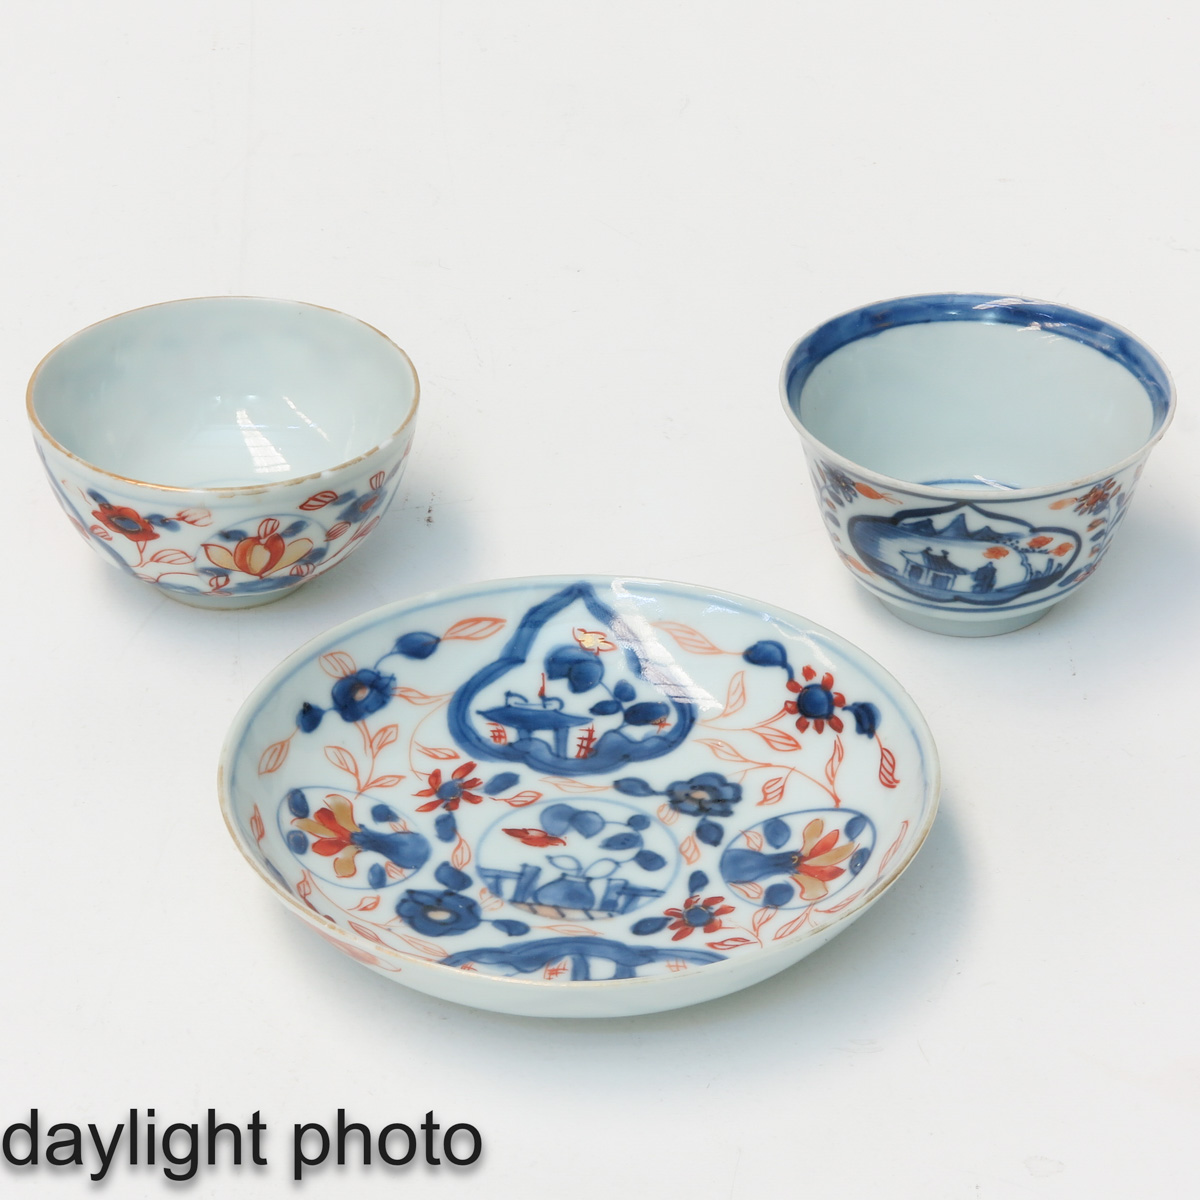 A Series of 6 Cups and Saucers - Image 9 of 10